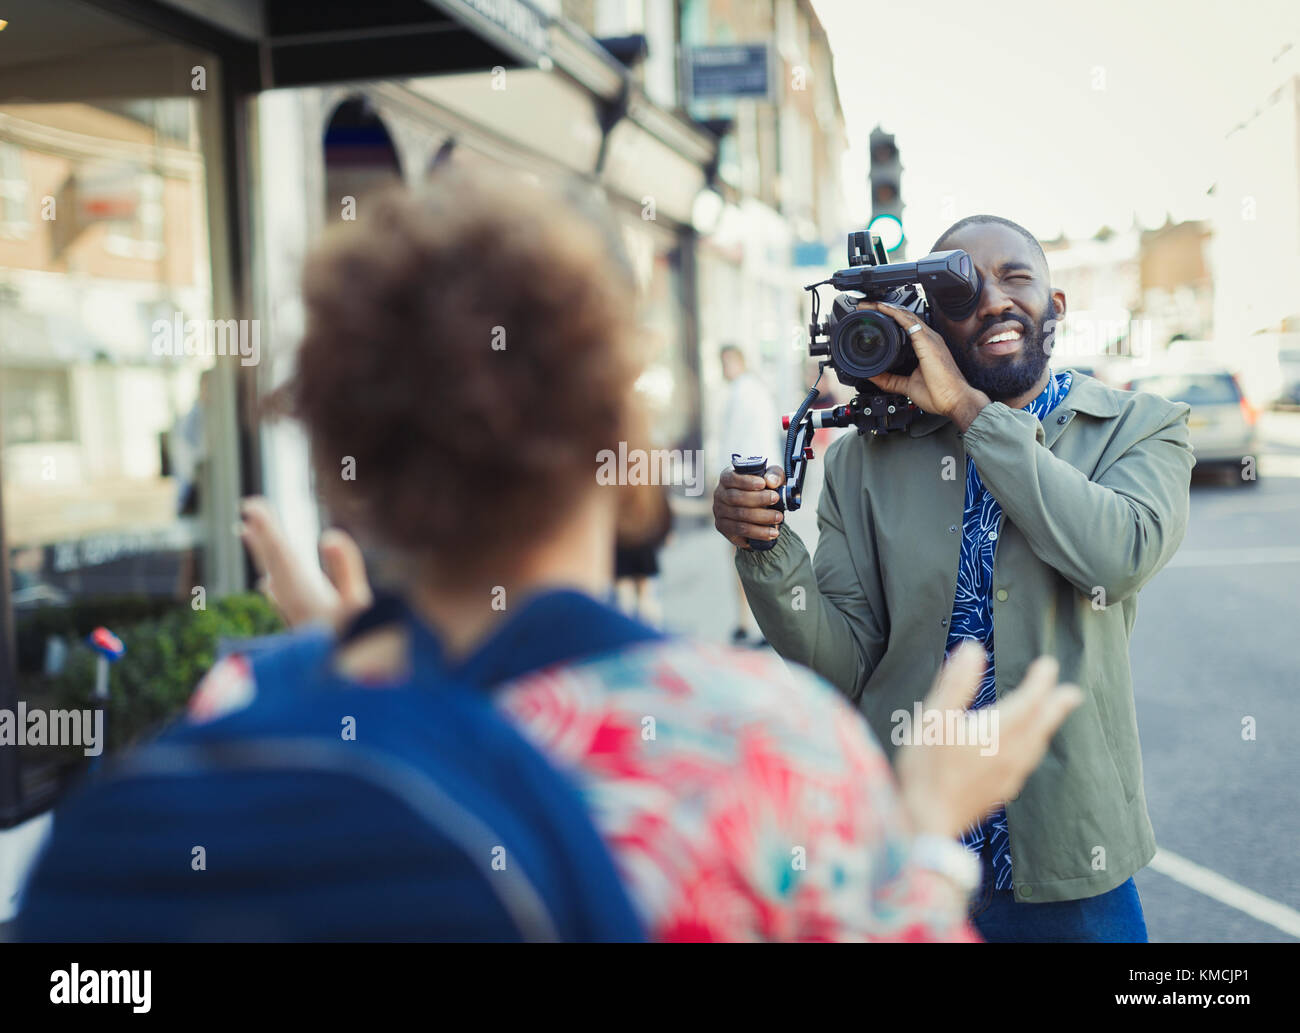 Young man with video camera videoing woman on street Stock Photo